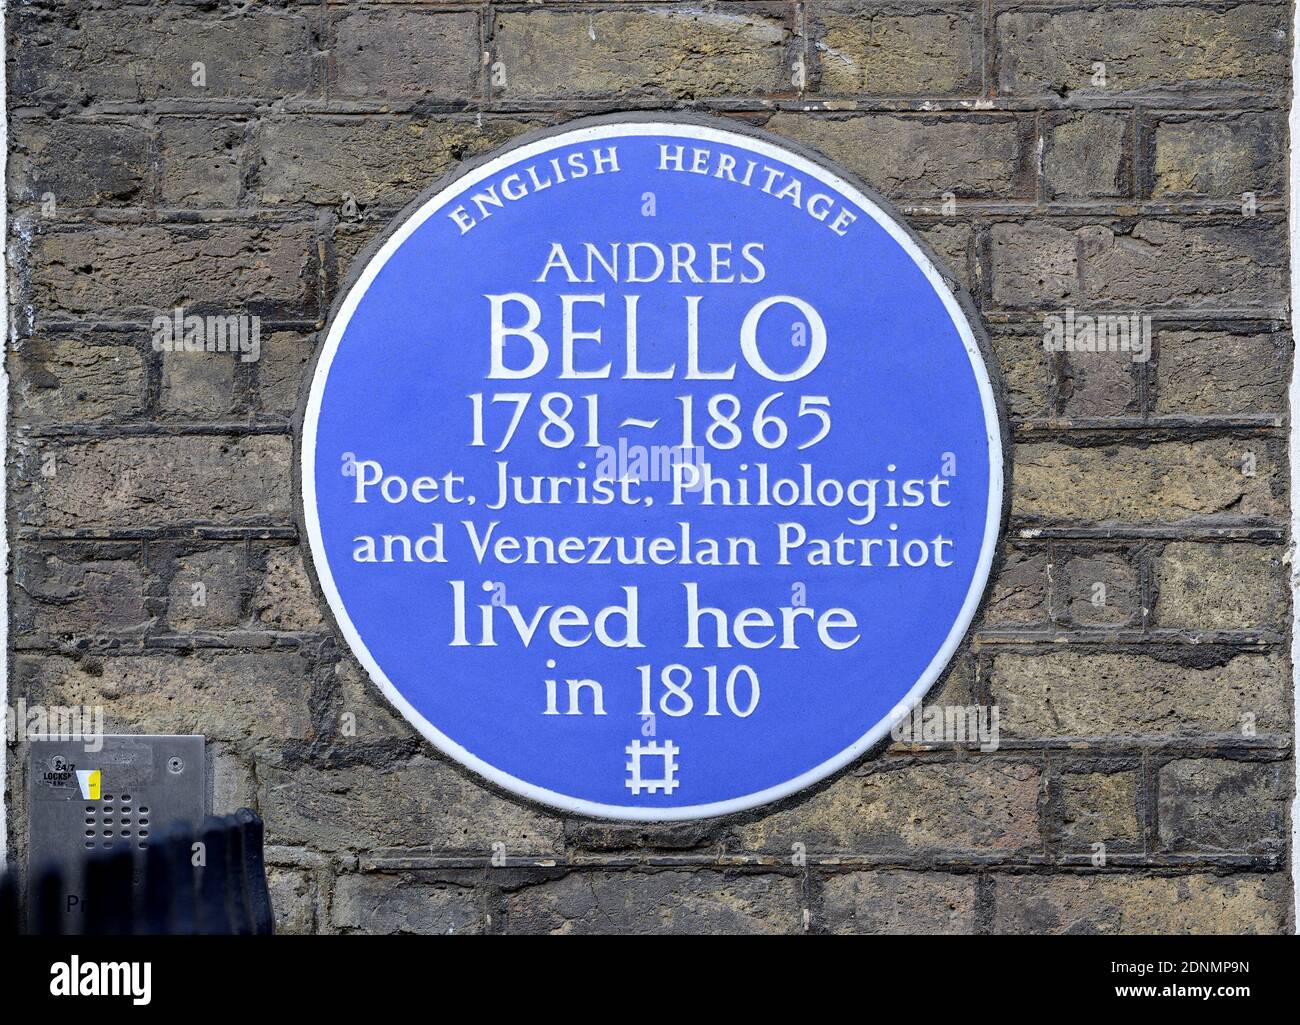 London, UK. Commemorative plaque at 58 Grafton Way: 'Andres Bello 1781-1865 poet, jurist, philologist and Venezuelan patriot lived here in 1810' Stock Photo